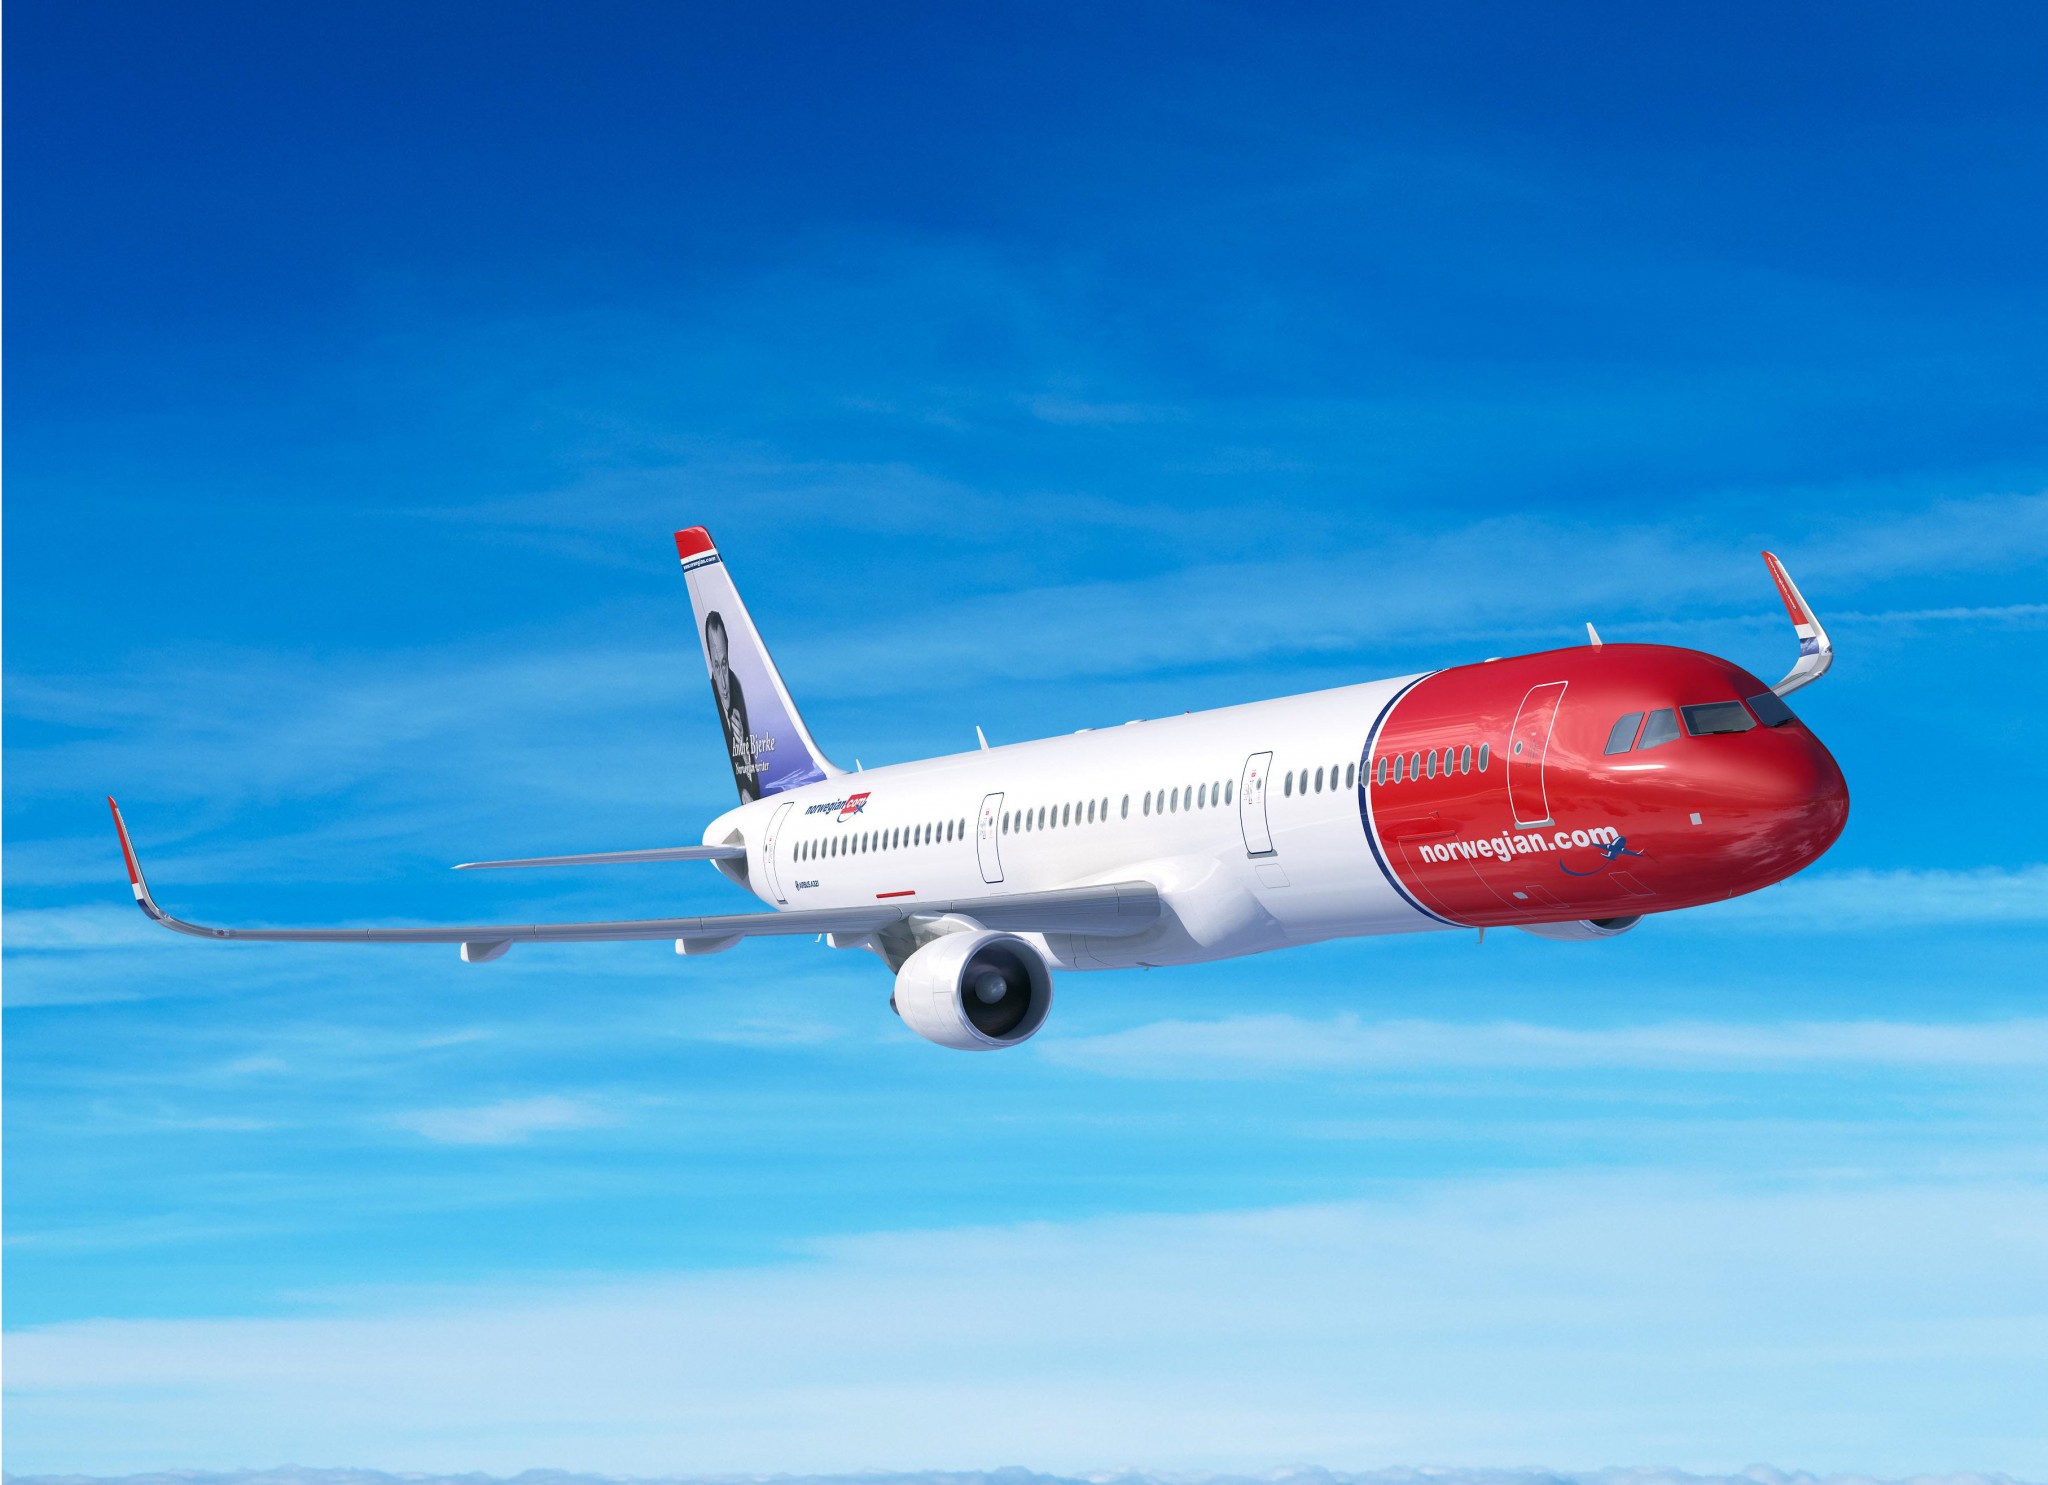 Norwegian reports 12 per cent passenger growth in February